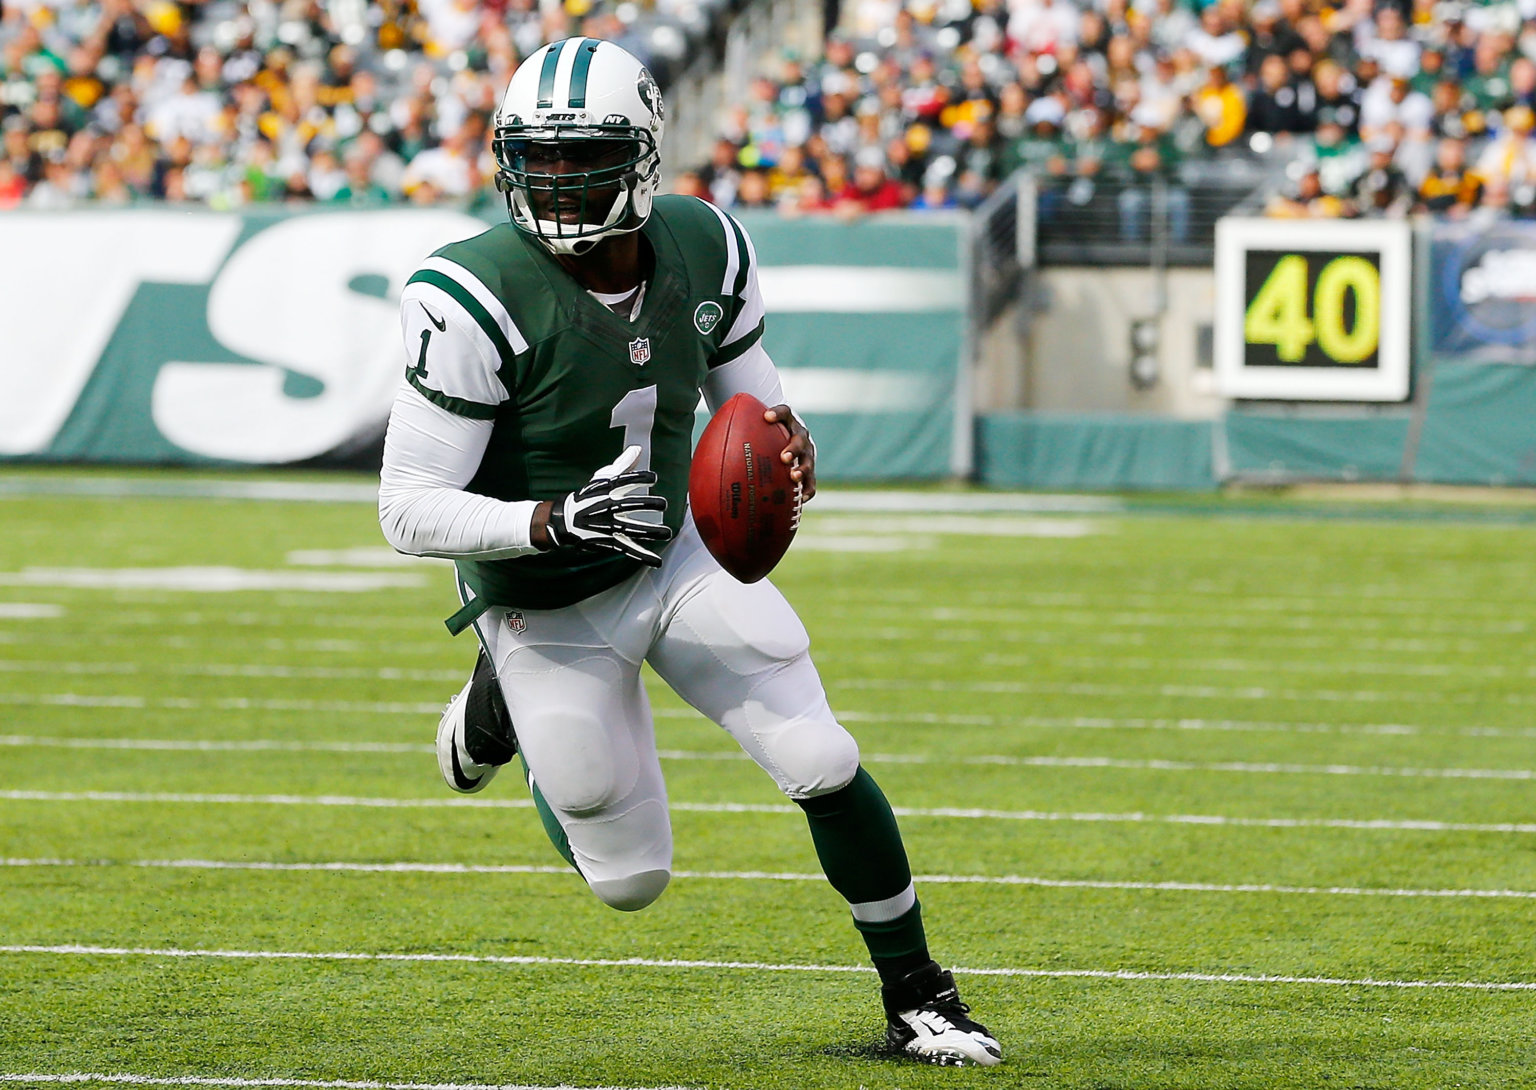 Michael Vick draws on past to become Jets starter – Metro US